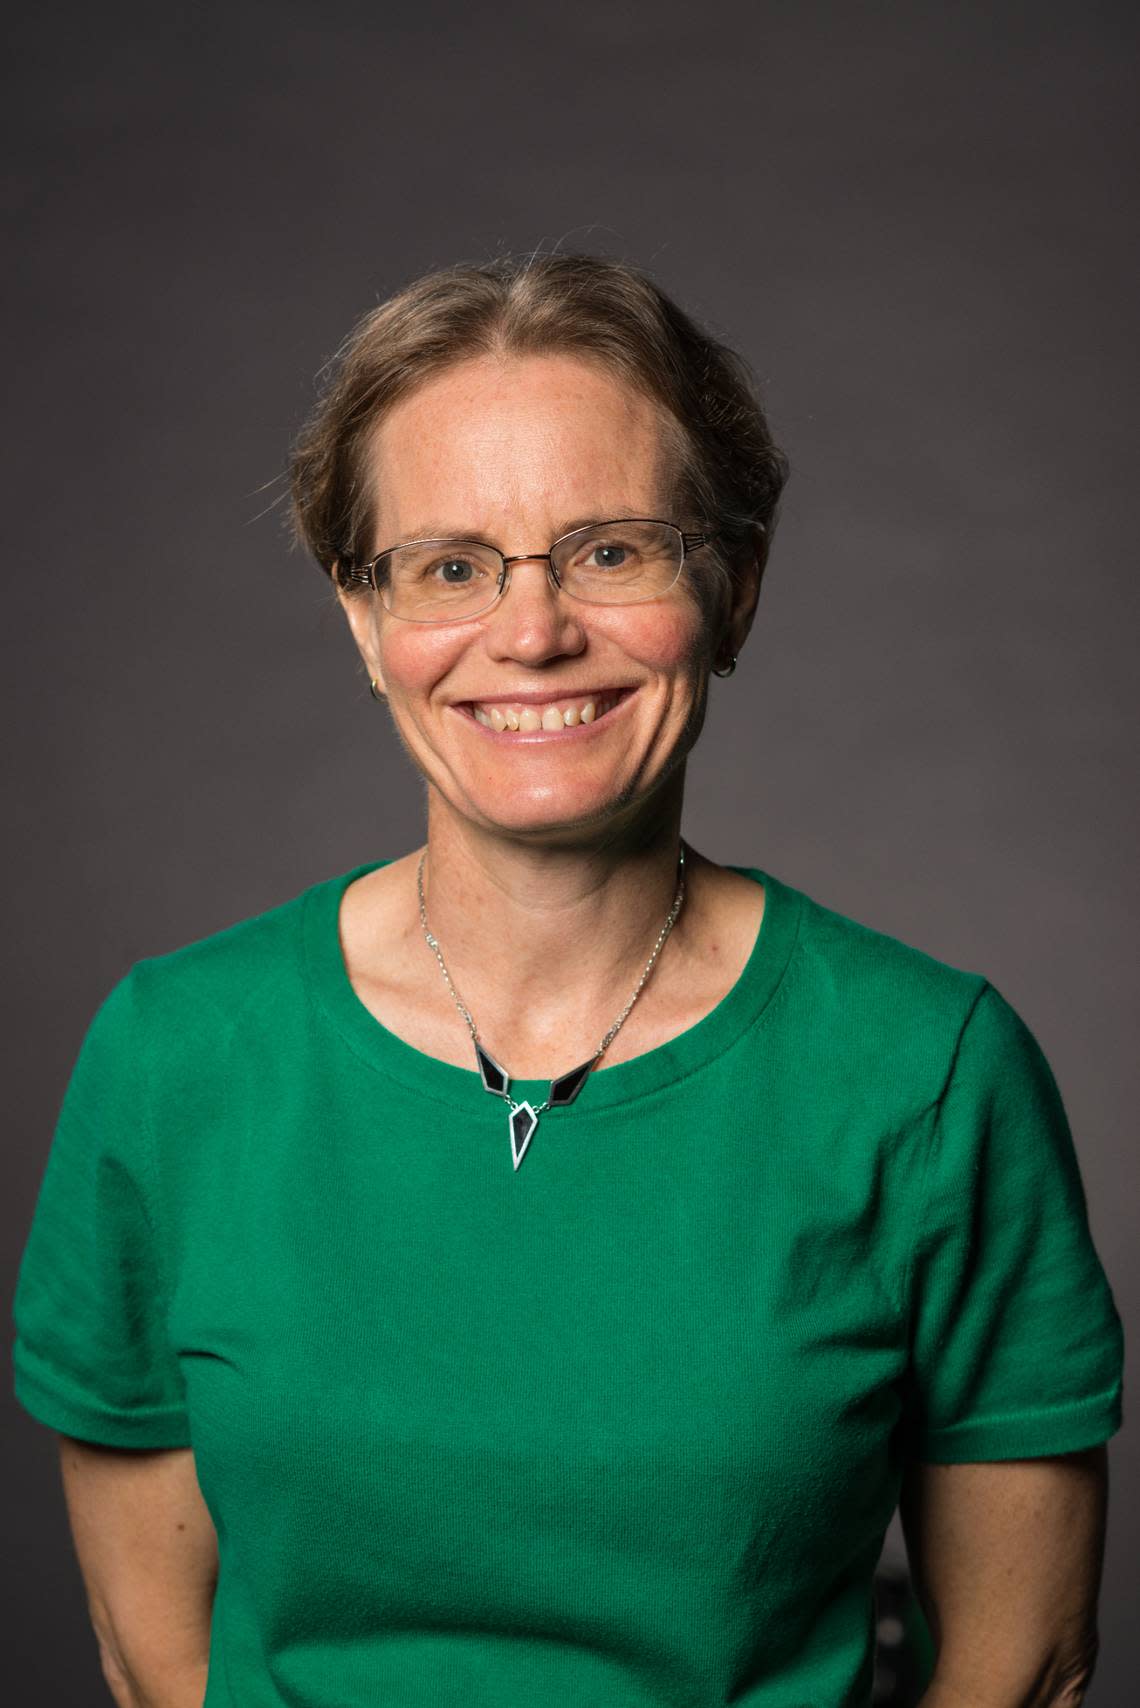 Dr. Mary Jo Trepka, professor and chair, Department of Epidemiology at Florida International University’s Robert Stempel College of Public Health & Social Work.